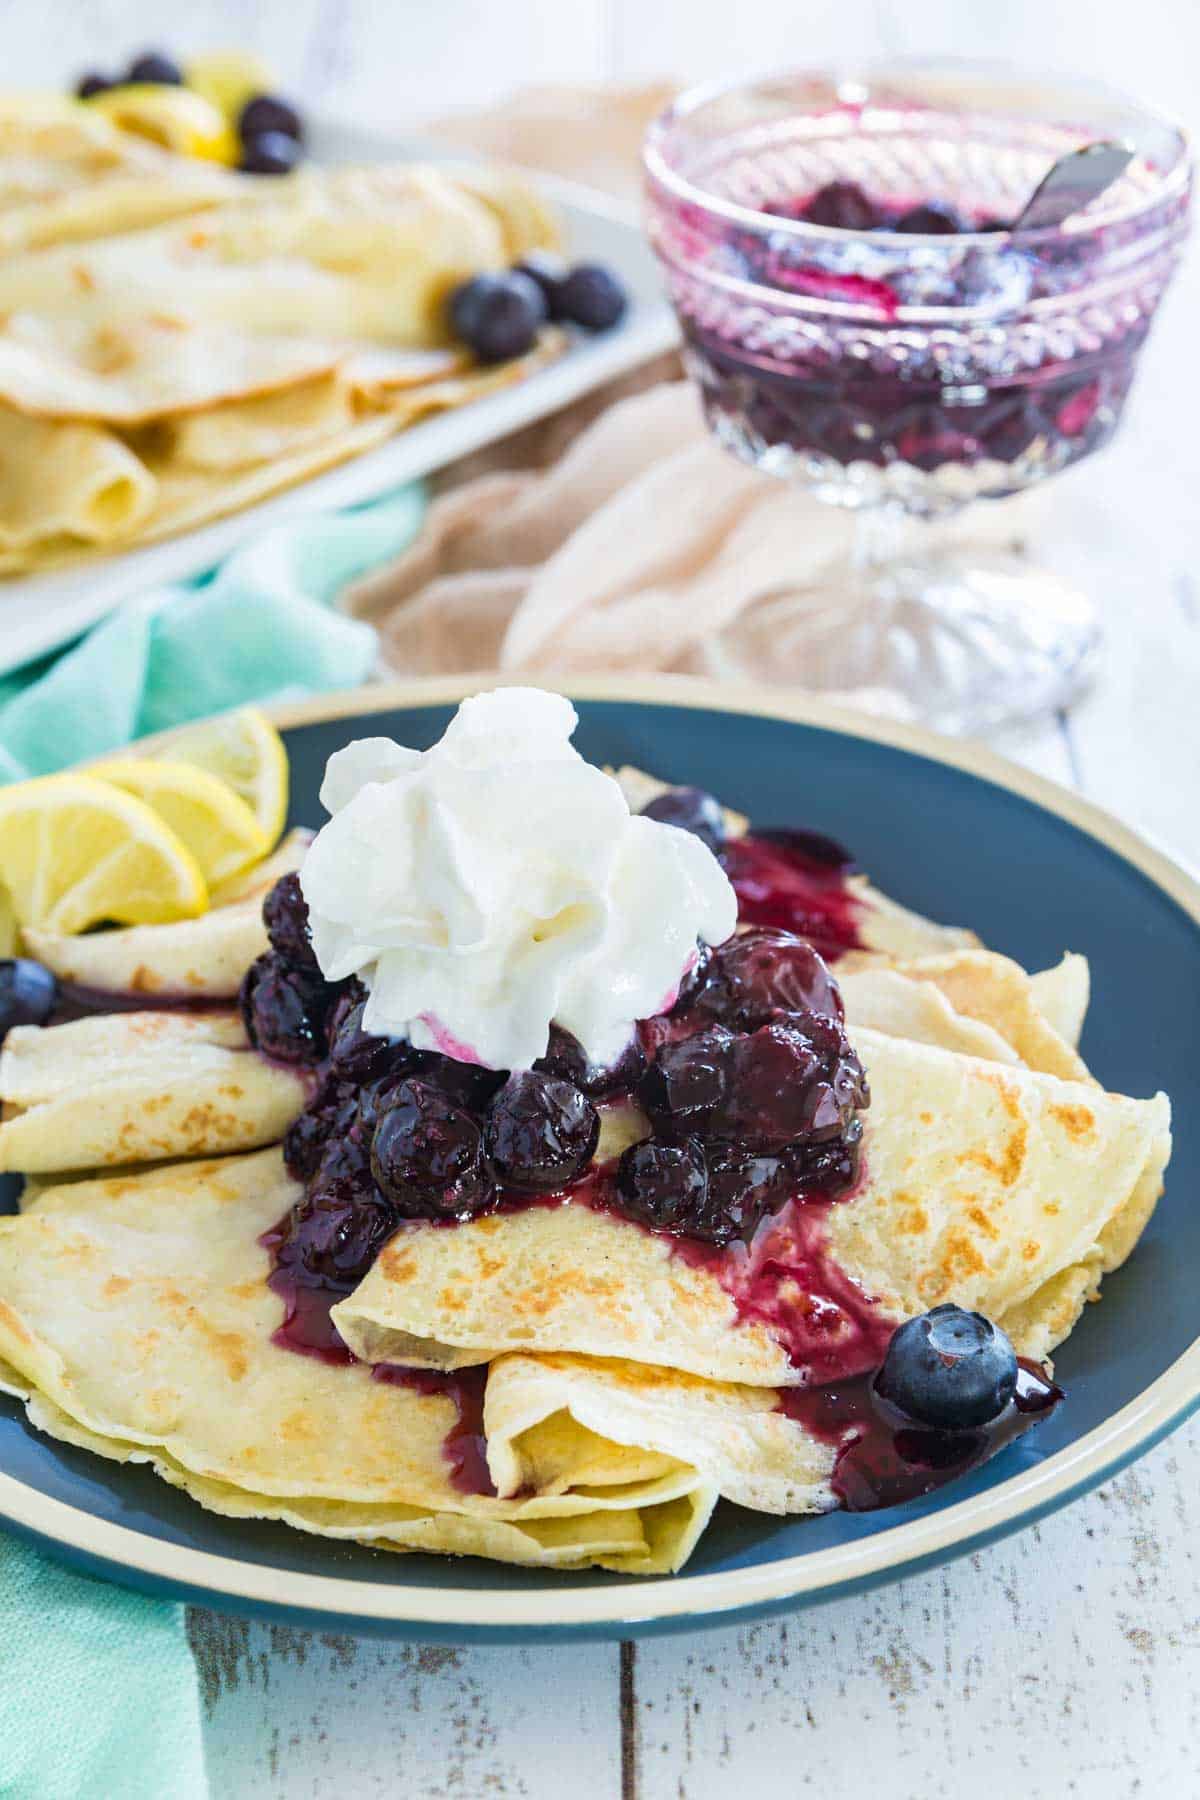 Homemade blueberry crepes topped with a dollop of whipped cream and a few fresh berries